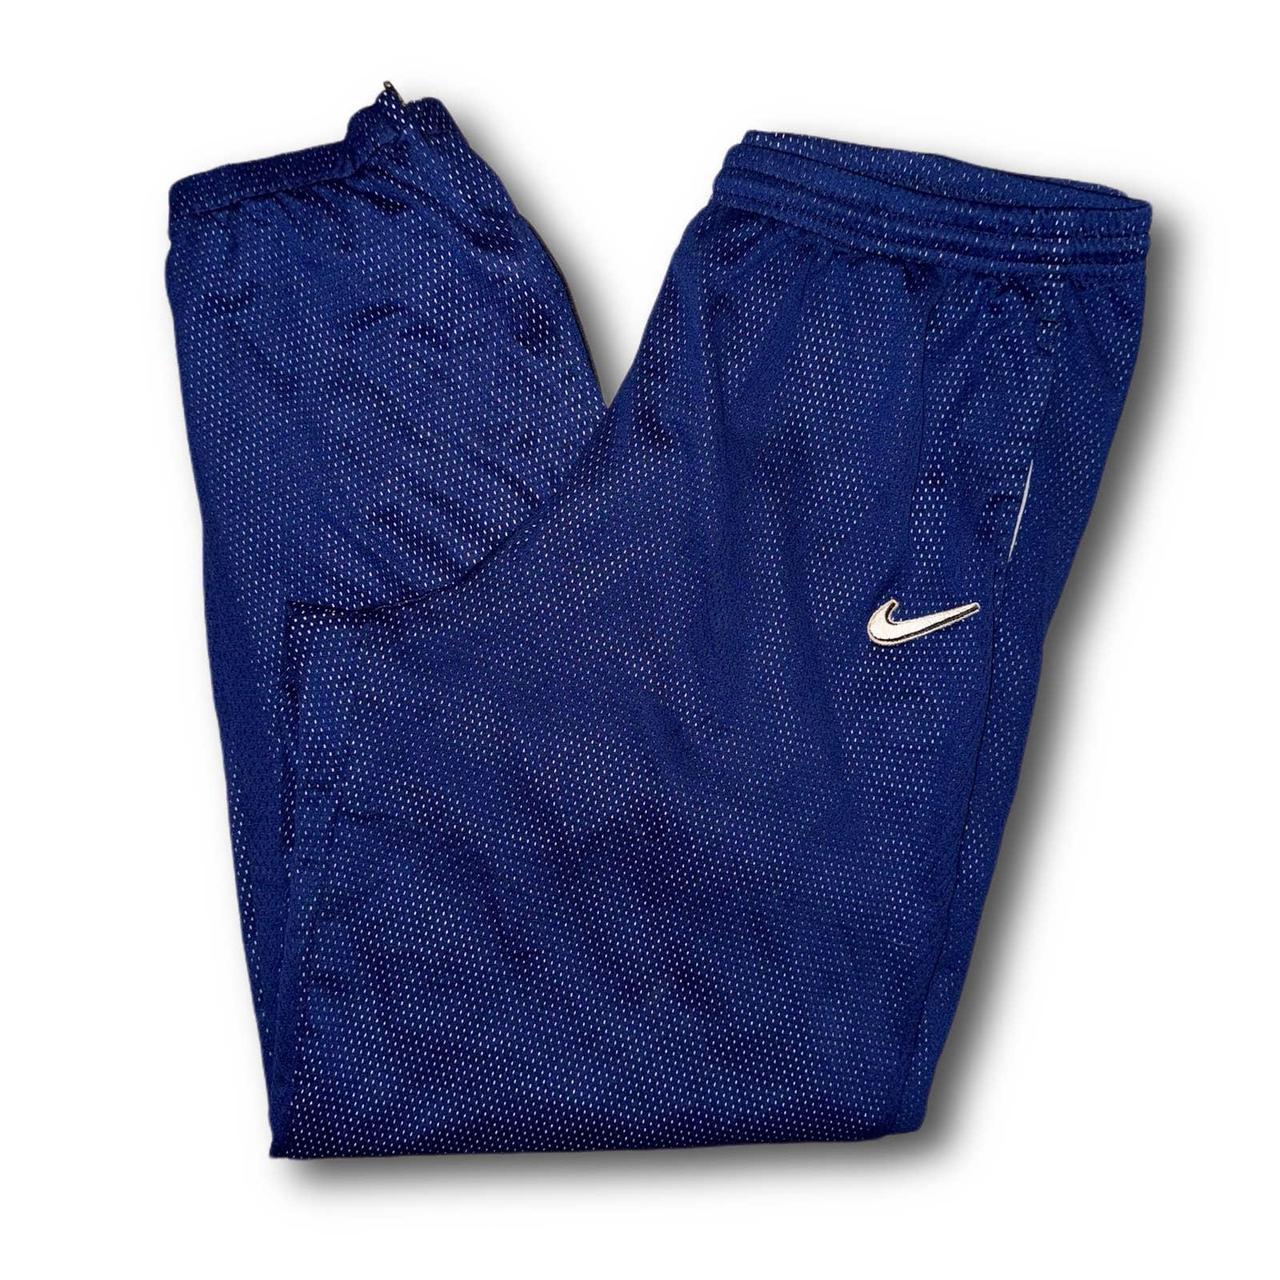 Nike Athletic Pants Men's Navy New with Tags